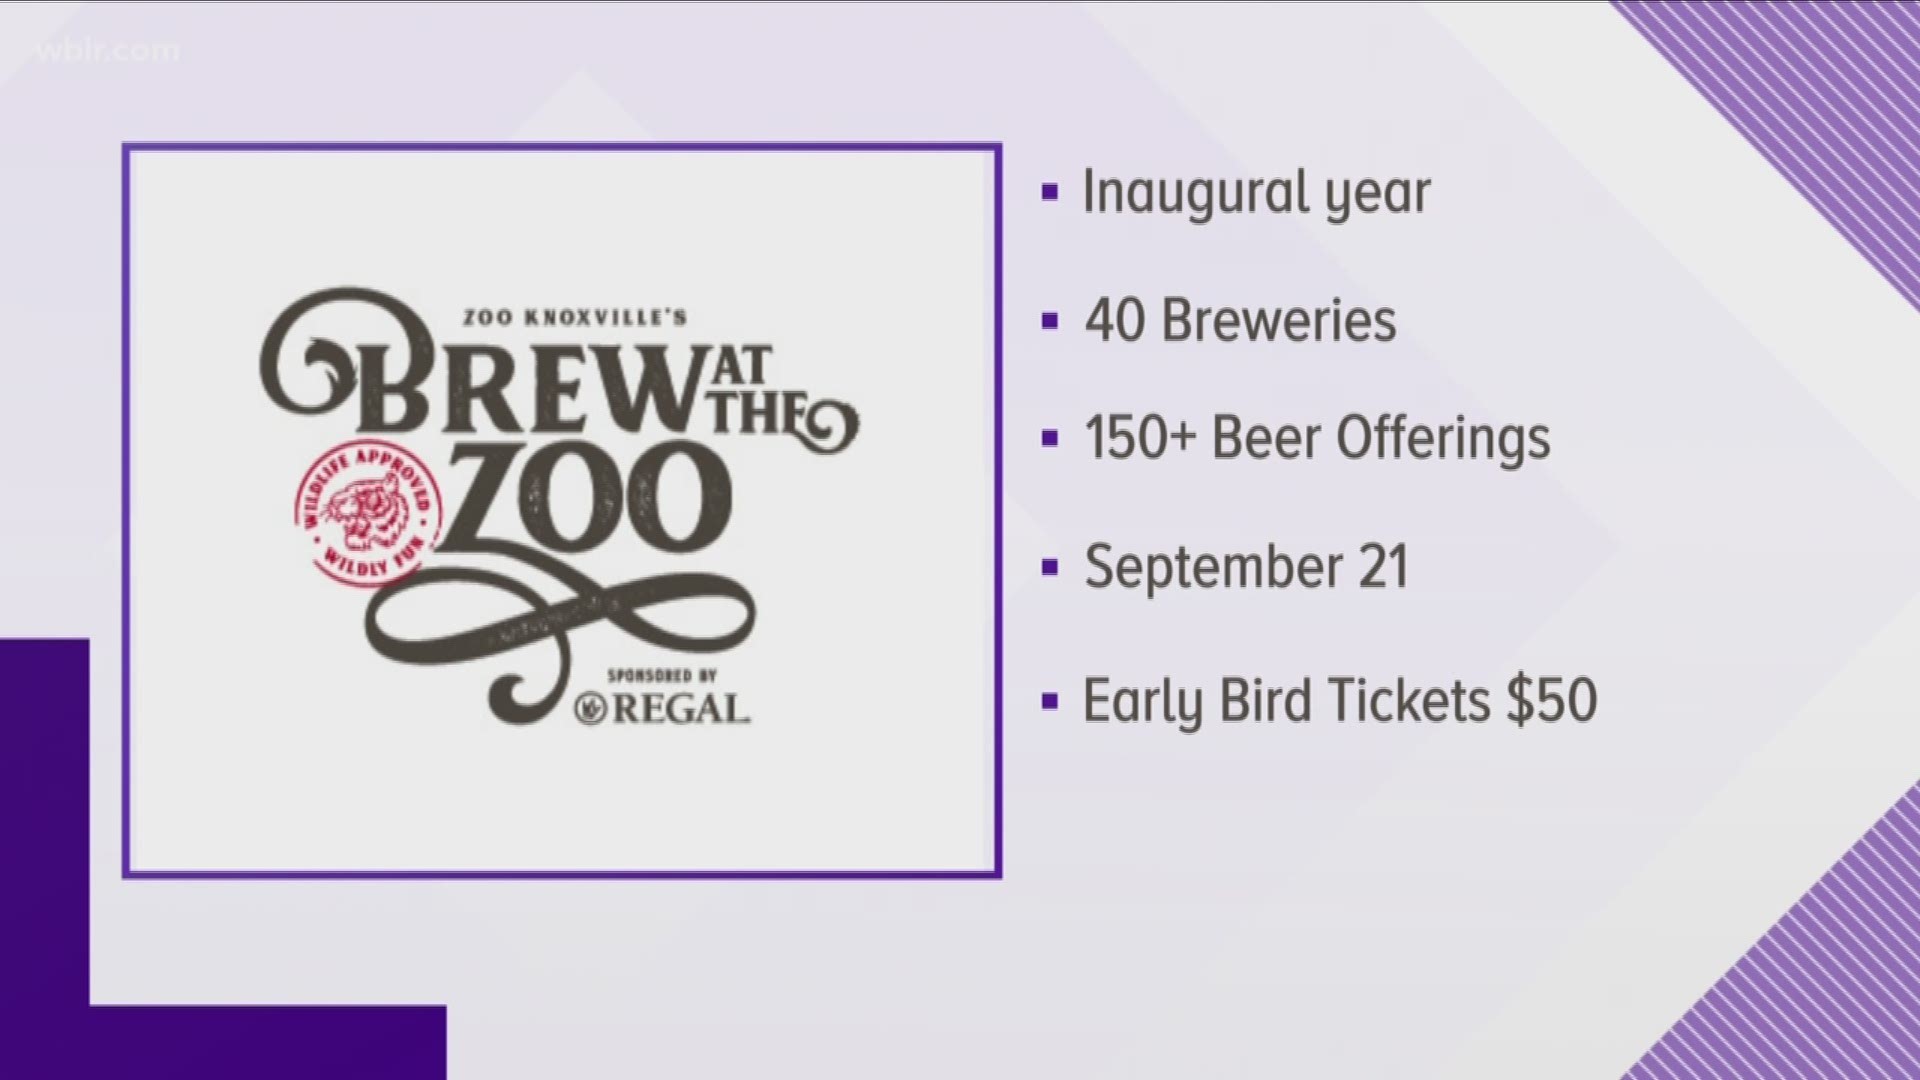 The zoo's first-ever, craft beer event features more than 150 beers from local, regional and national breweries.